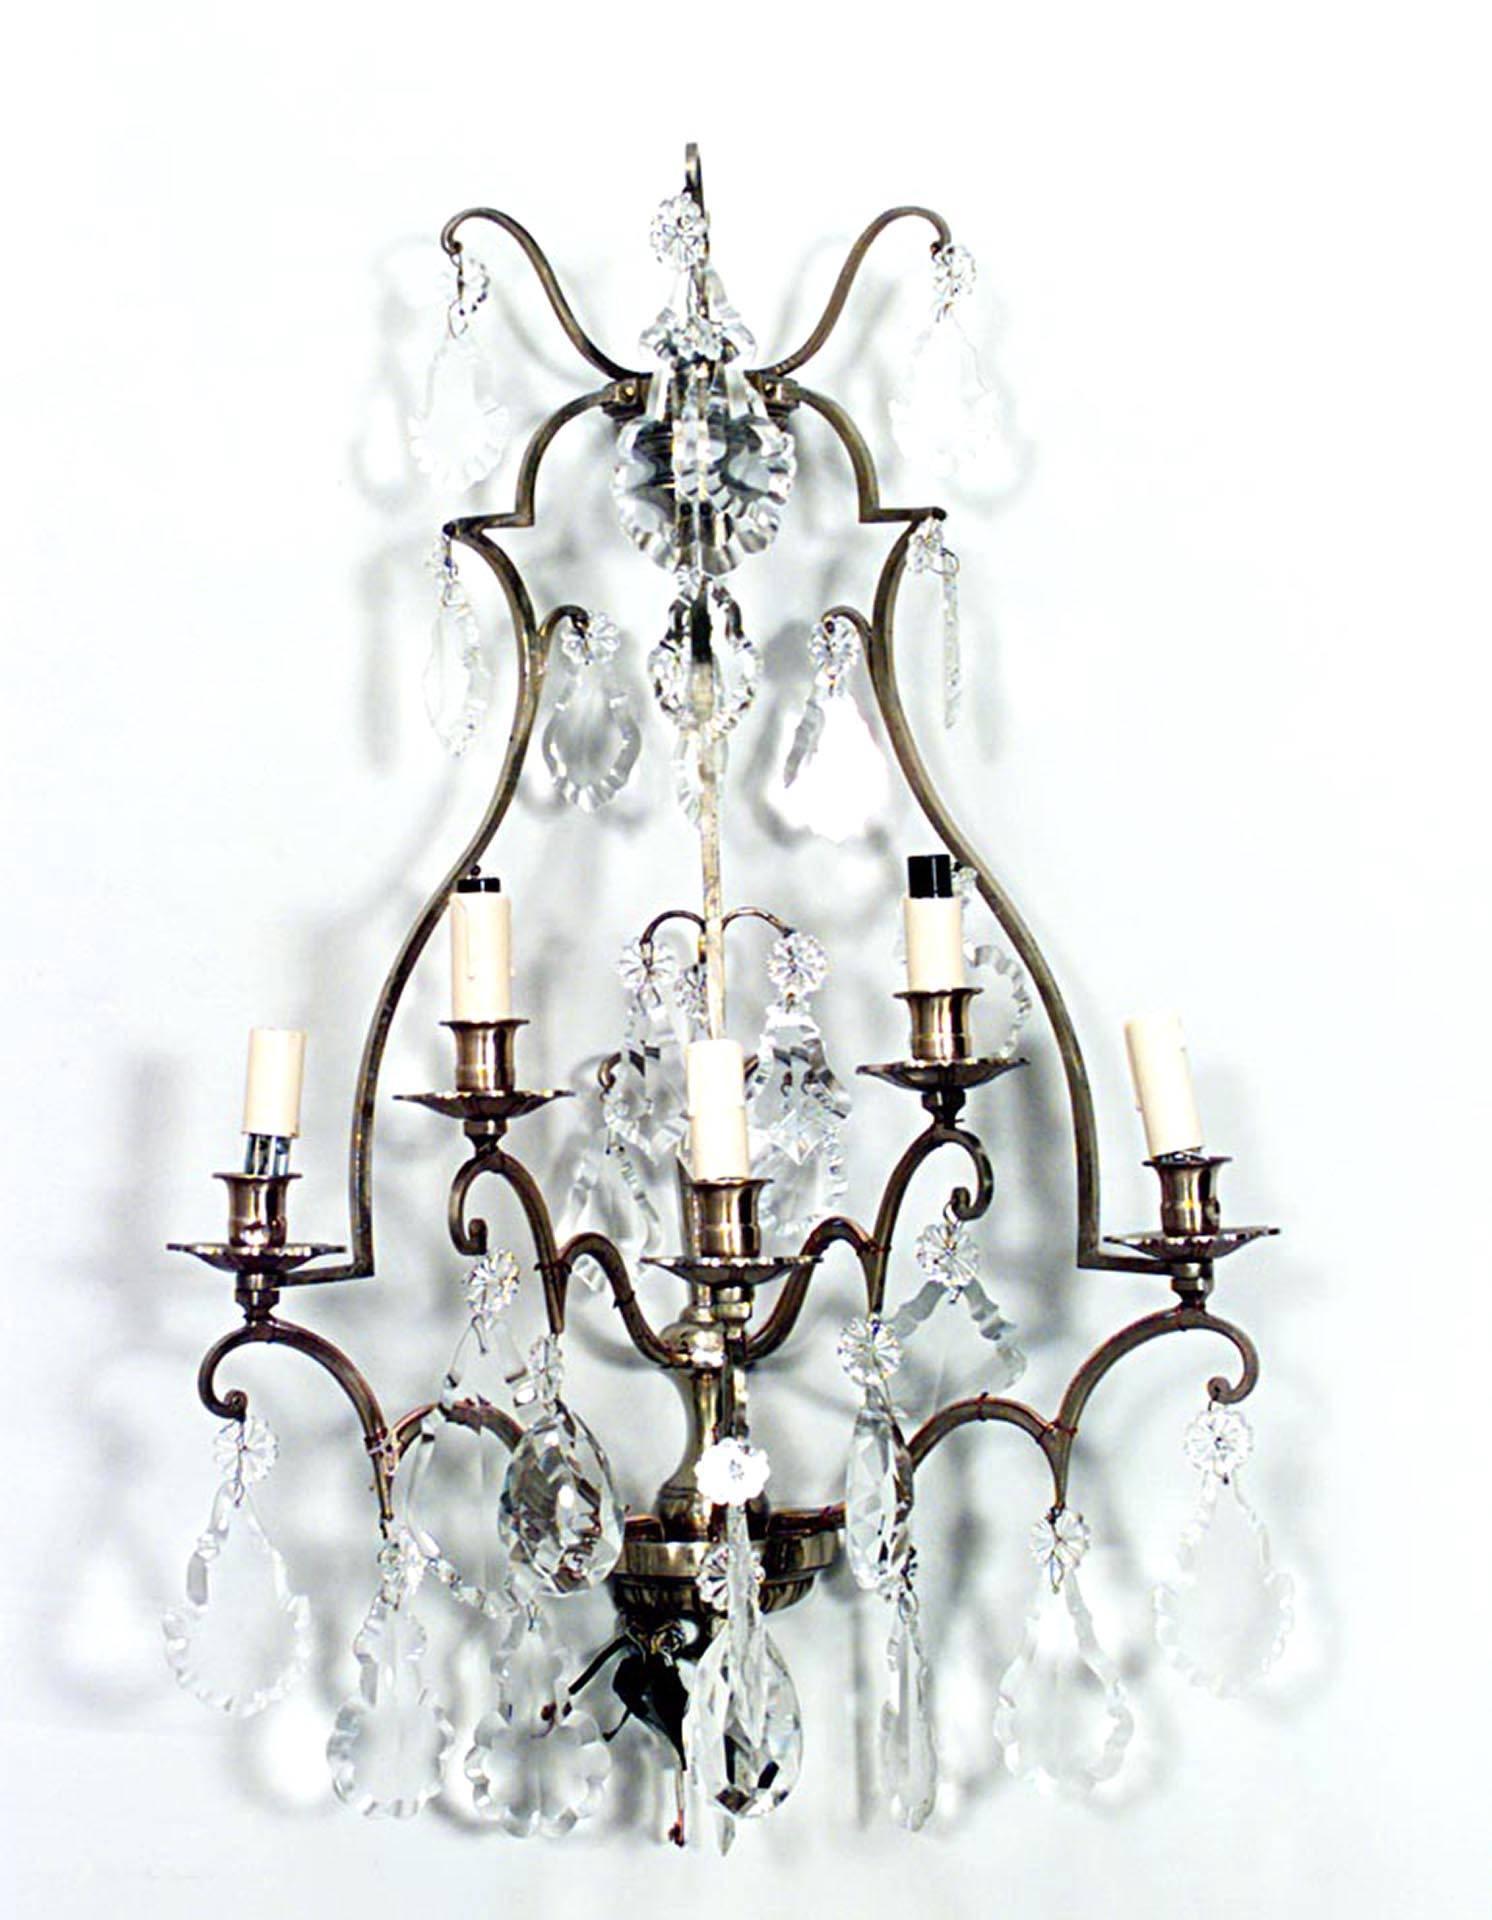 Pair of French Louis XV-style (20th Century) lacquered brass wall sconces with five arms and cut glass teardrop-shaped hanging crystals. (PRICED AS Pair)
